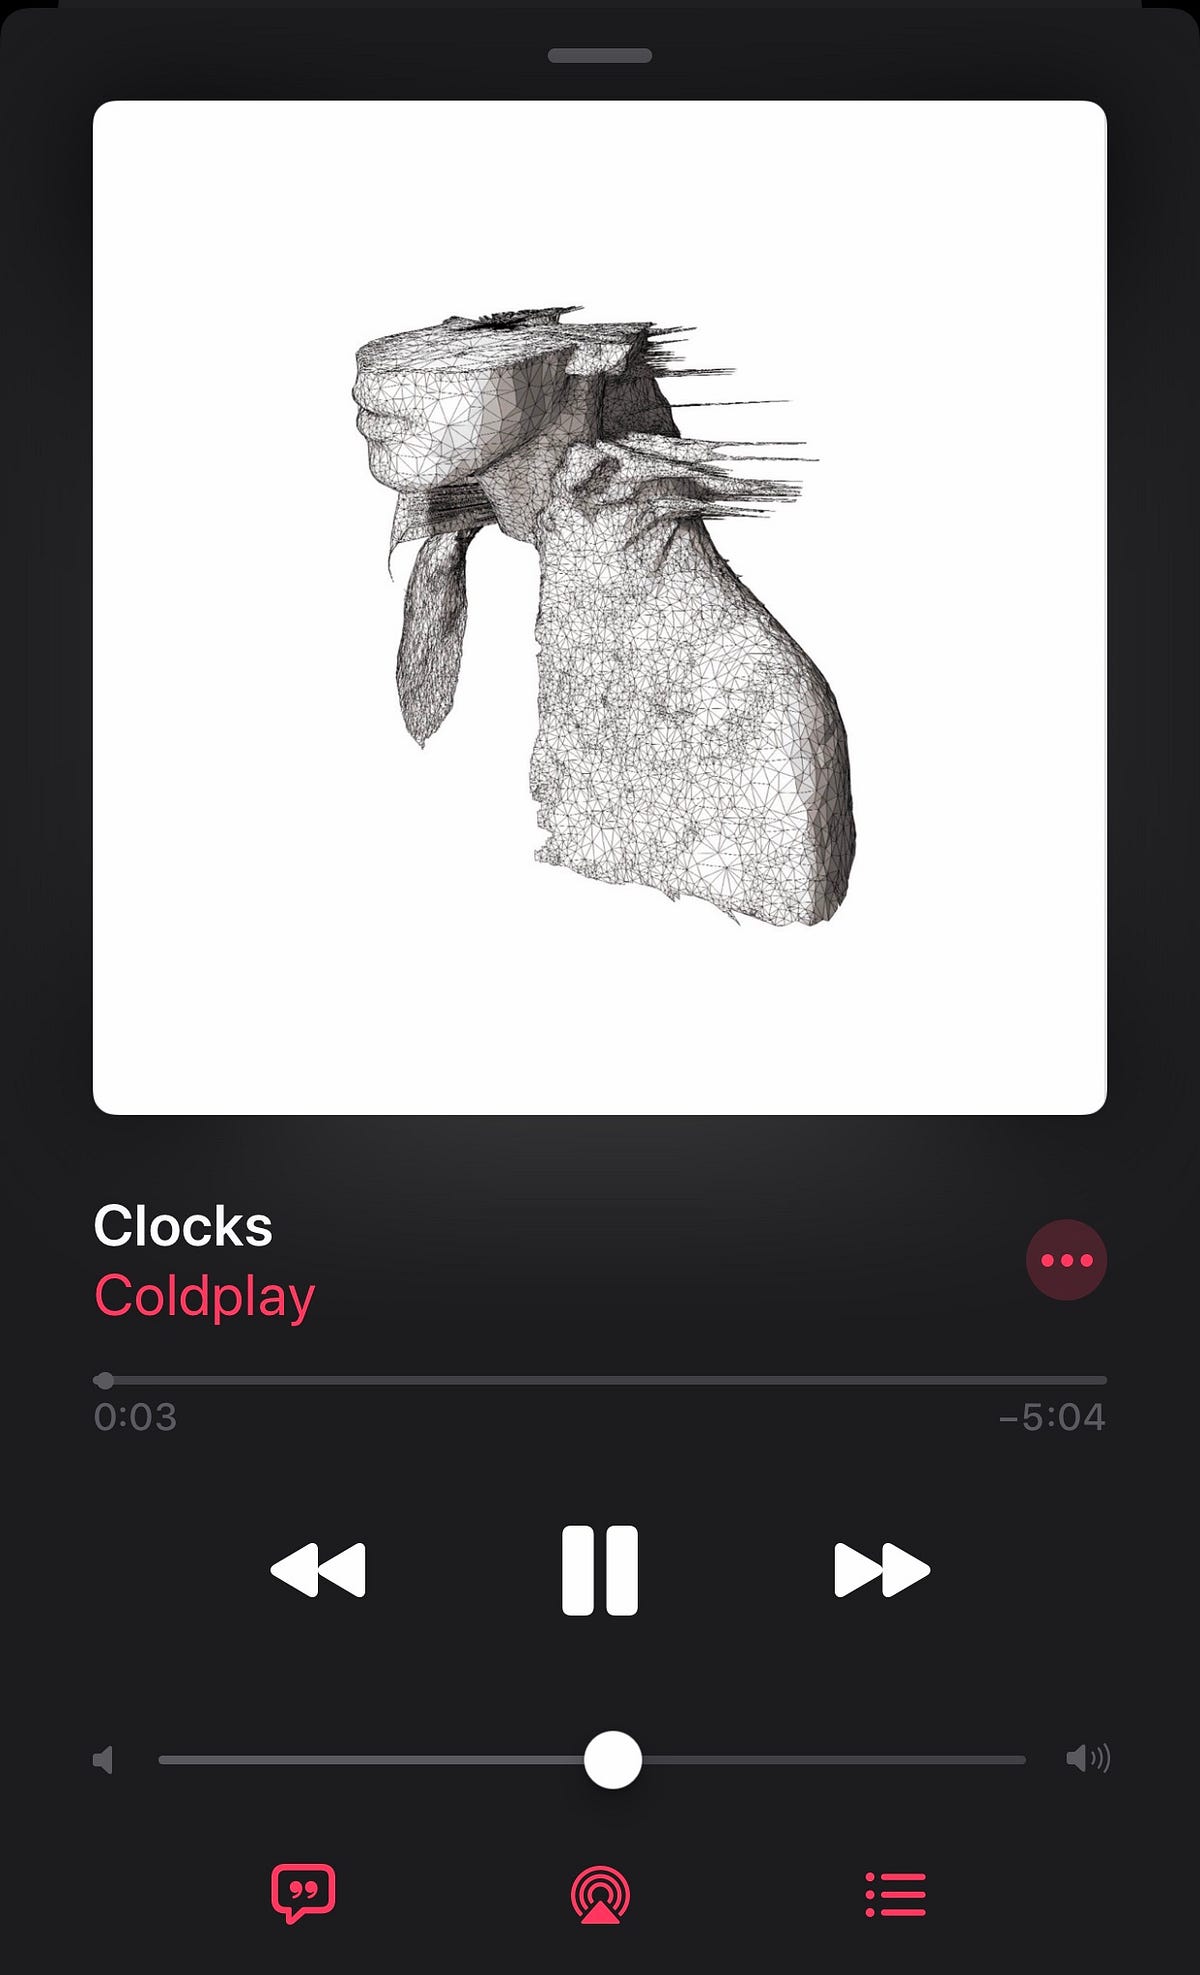 Not Enough Time in Coldplay's Clocks | by Frances Gatta | Medium